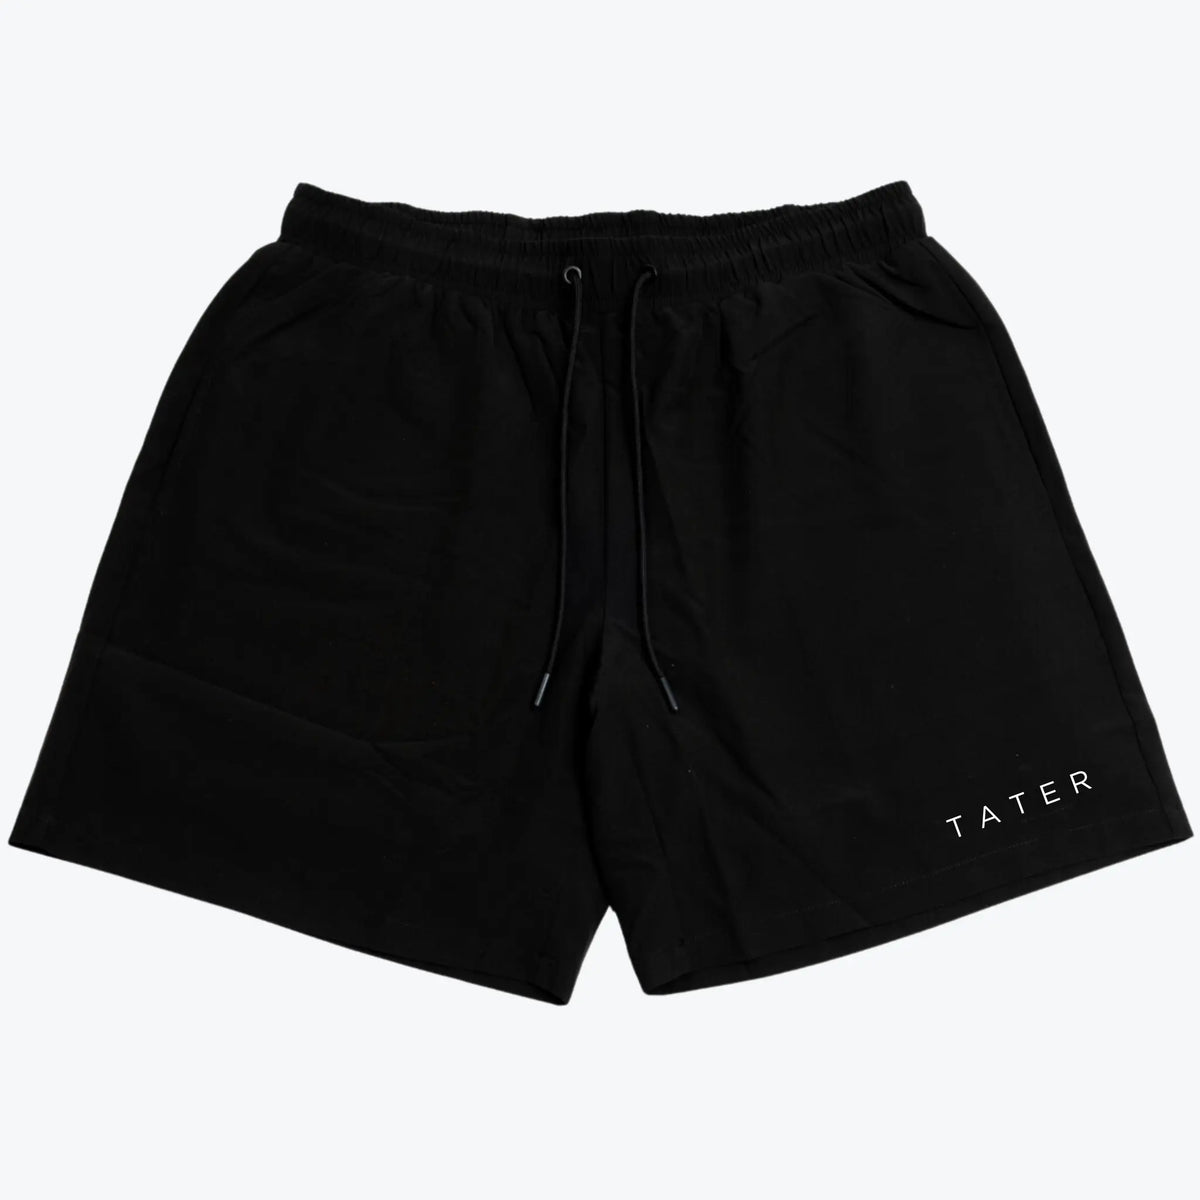 The image displays a pair of black athletic workout shorts that feature a white &quot;TATER&quot; logo on the left leg. These shorts are likely designed for comfort and performance, suitable for baseball practice or general athletic activities. The shorts seem to have a drawstring for adjustable fit and might be compression lined, offering additional support and mobility for athletes. The black color is classic, making them versatile for pairing with other athletic wear.